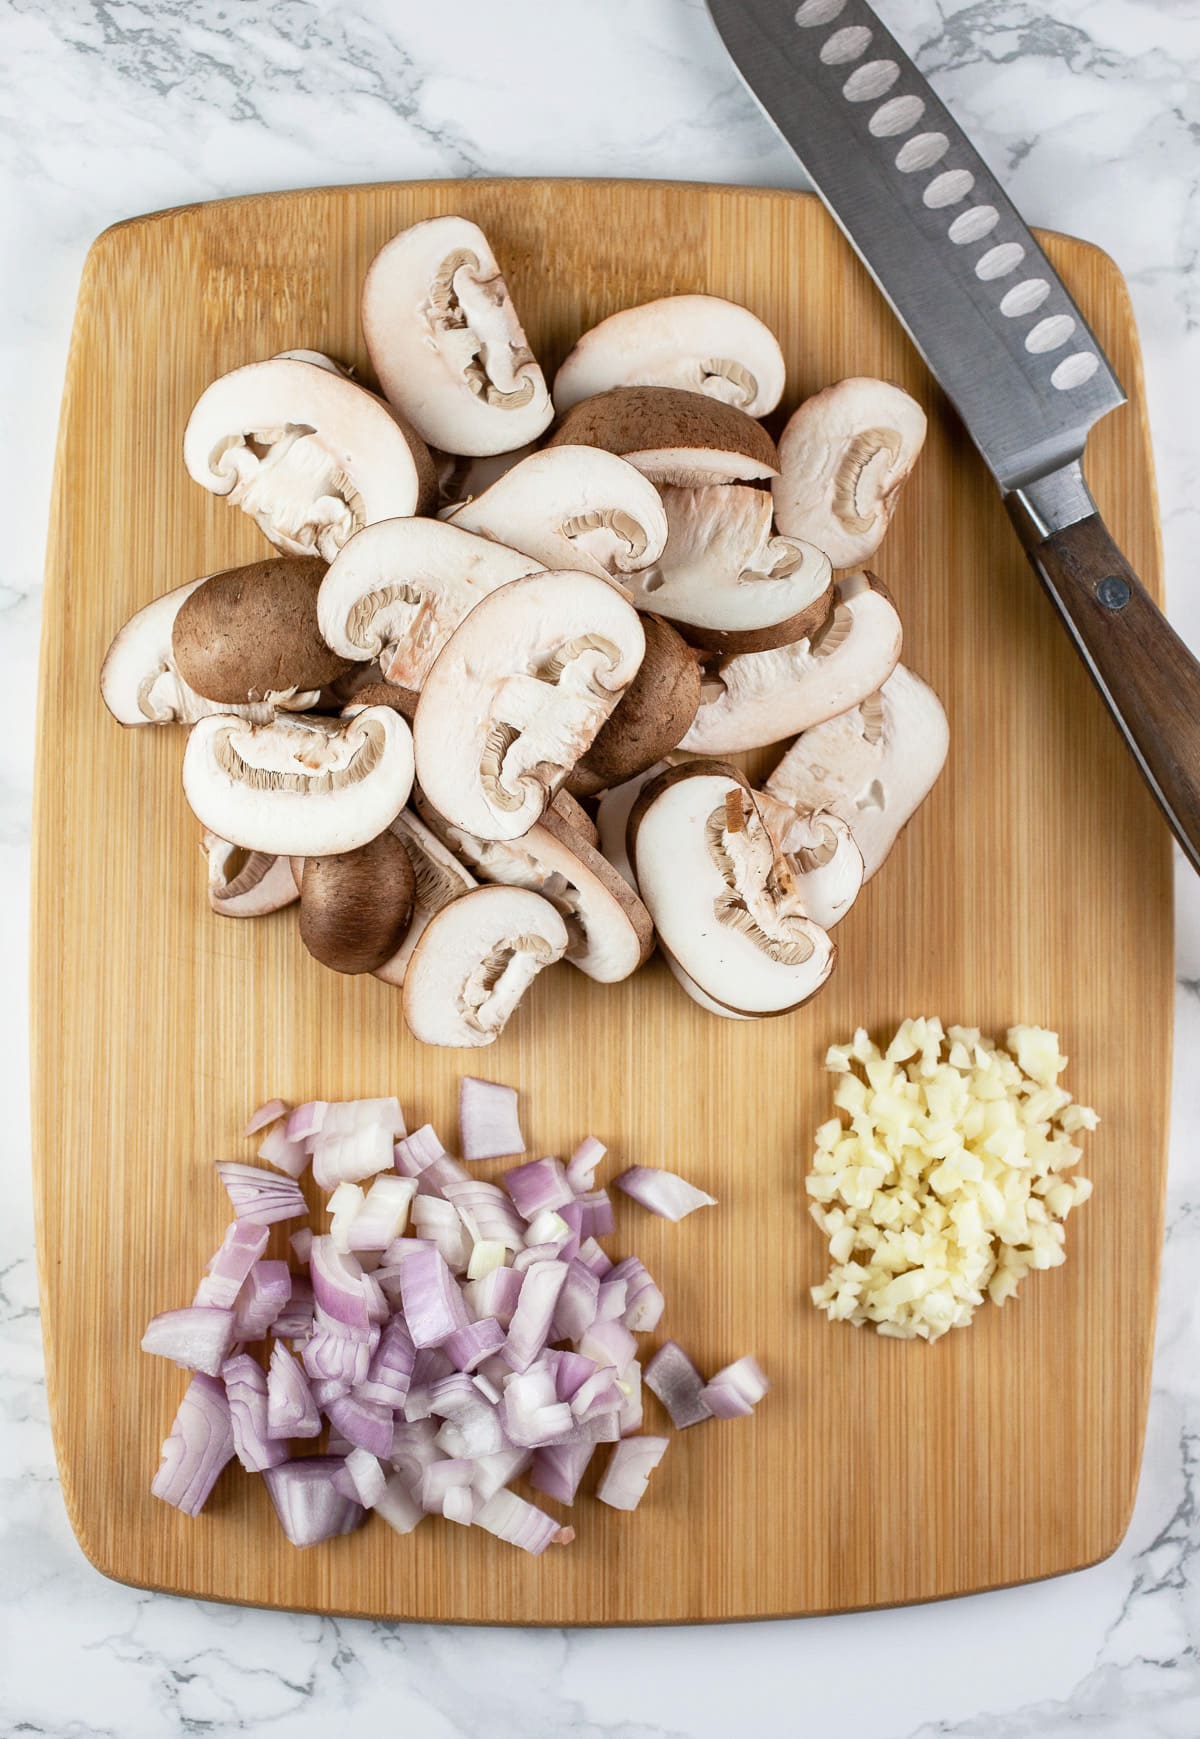 Minced garlic, shallots, and sliced mushrooms on wooden cutting board with knife.